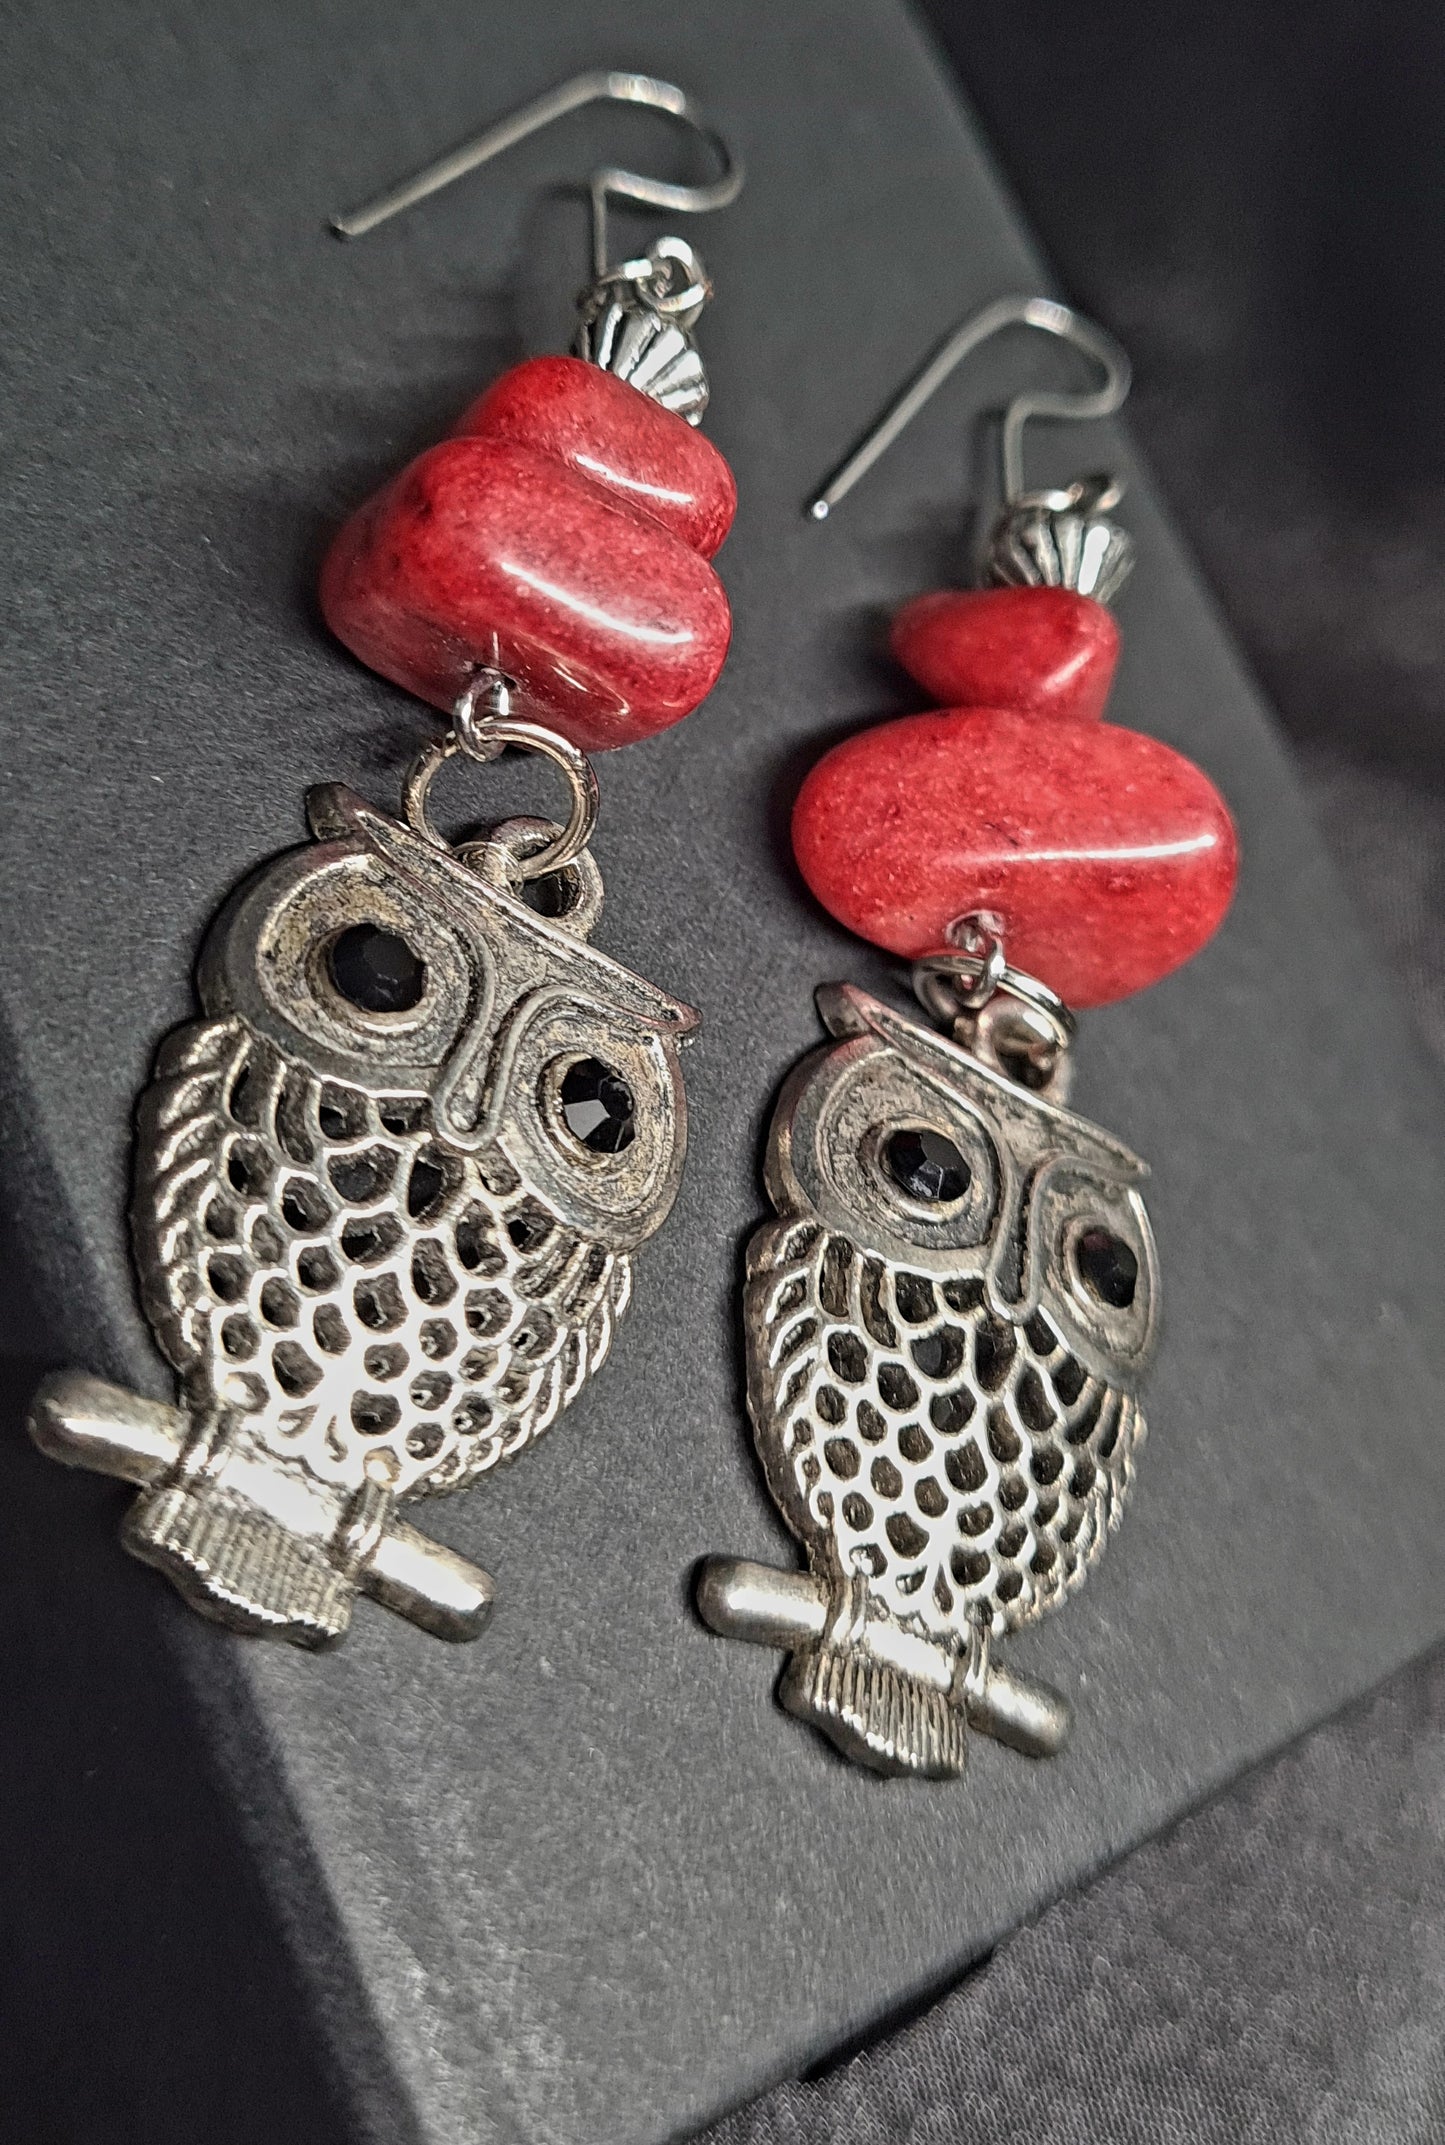 Pair of silver owl earrings with red beads on a black box. The earrings are made of silver and have a realistic owl design. The owl has large eyes, a beak, and wings. The earrings are decorated with red beads. The earrings are sitting on a black box